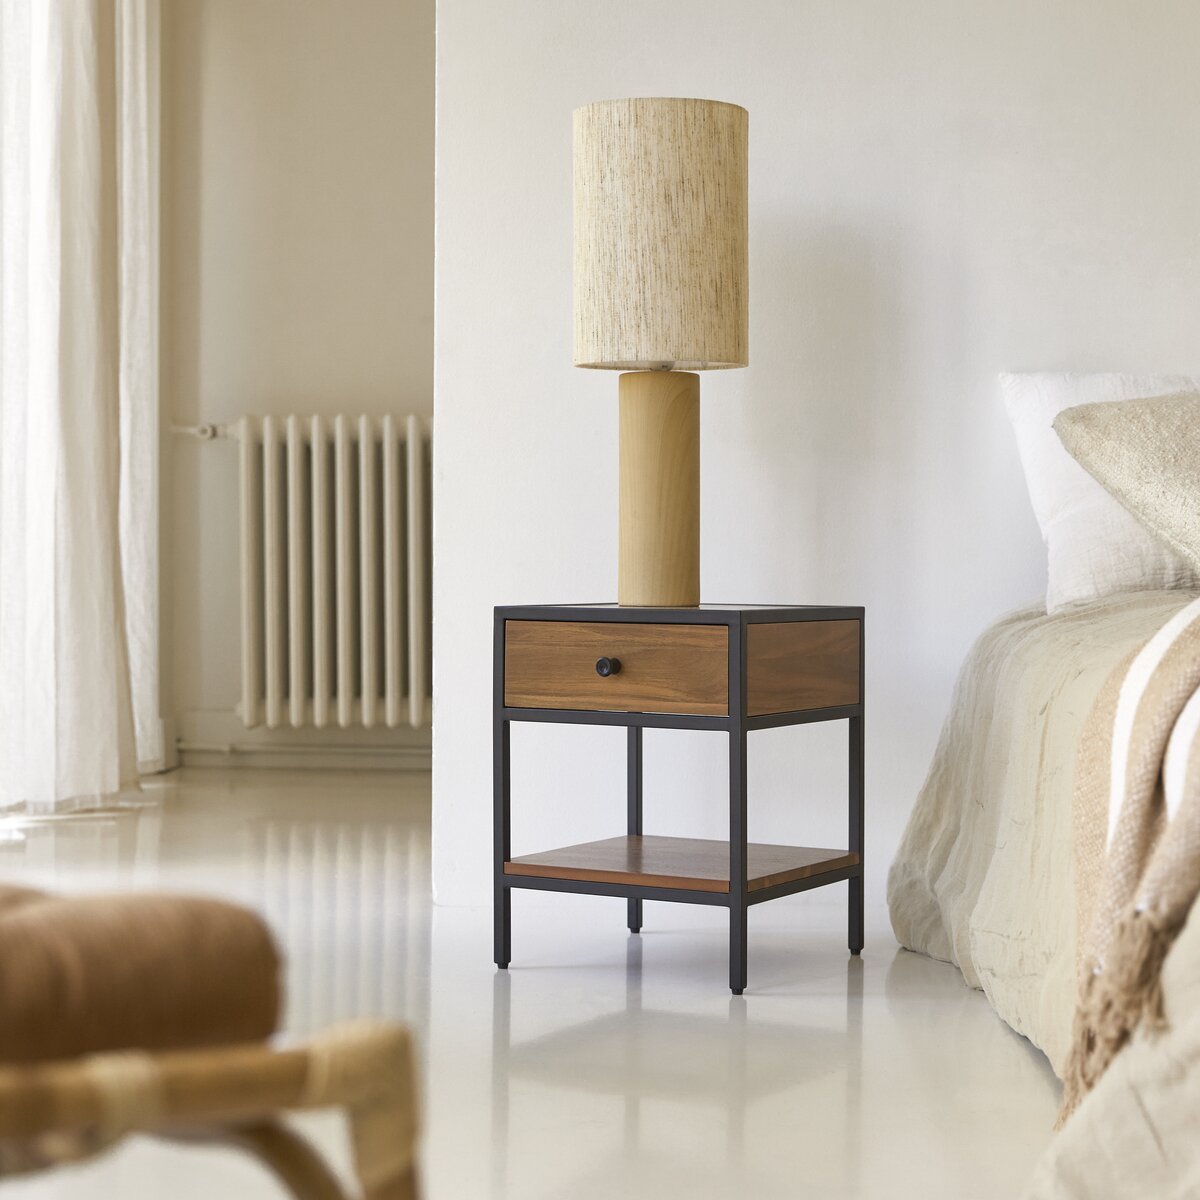 Agra - Solid acacia and metal bedside table